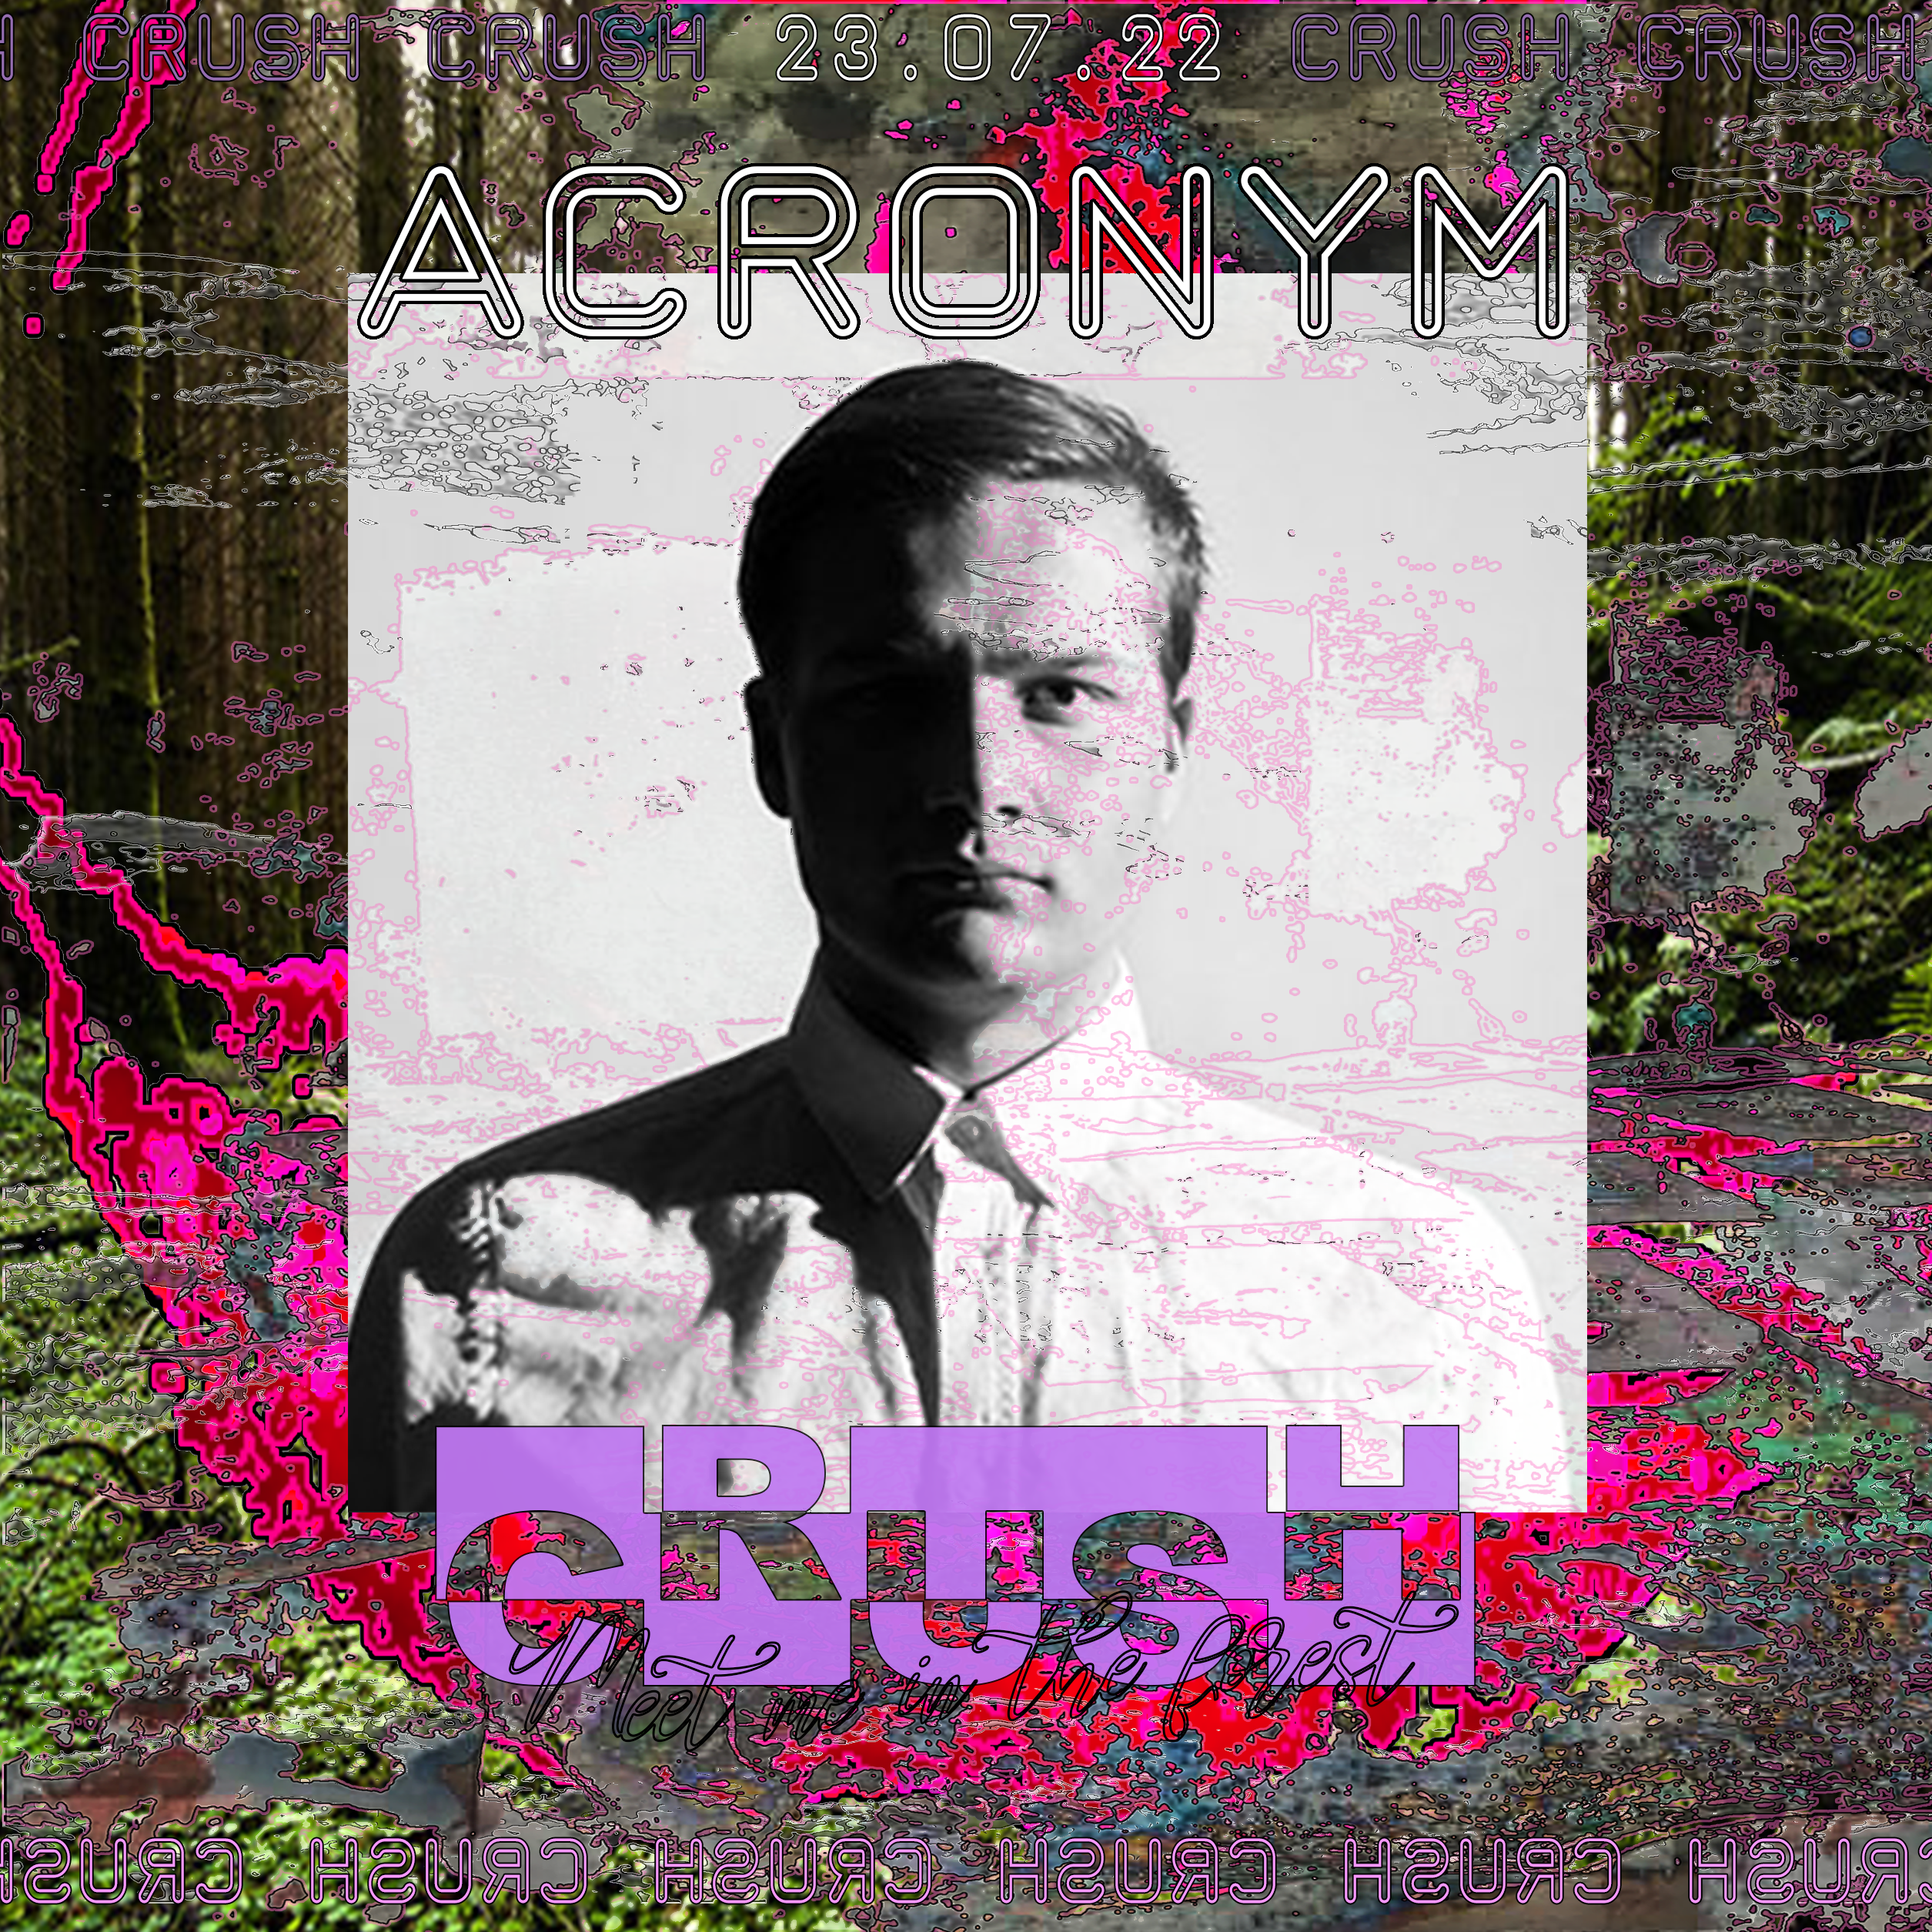 Crush - Meet me in the Forest W/ Lucy, SSTROM, Acronym - フライヤー裏